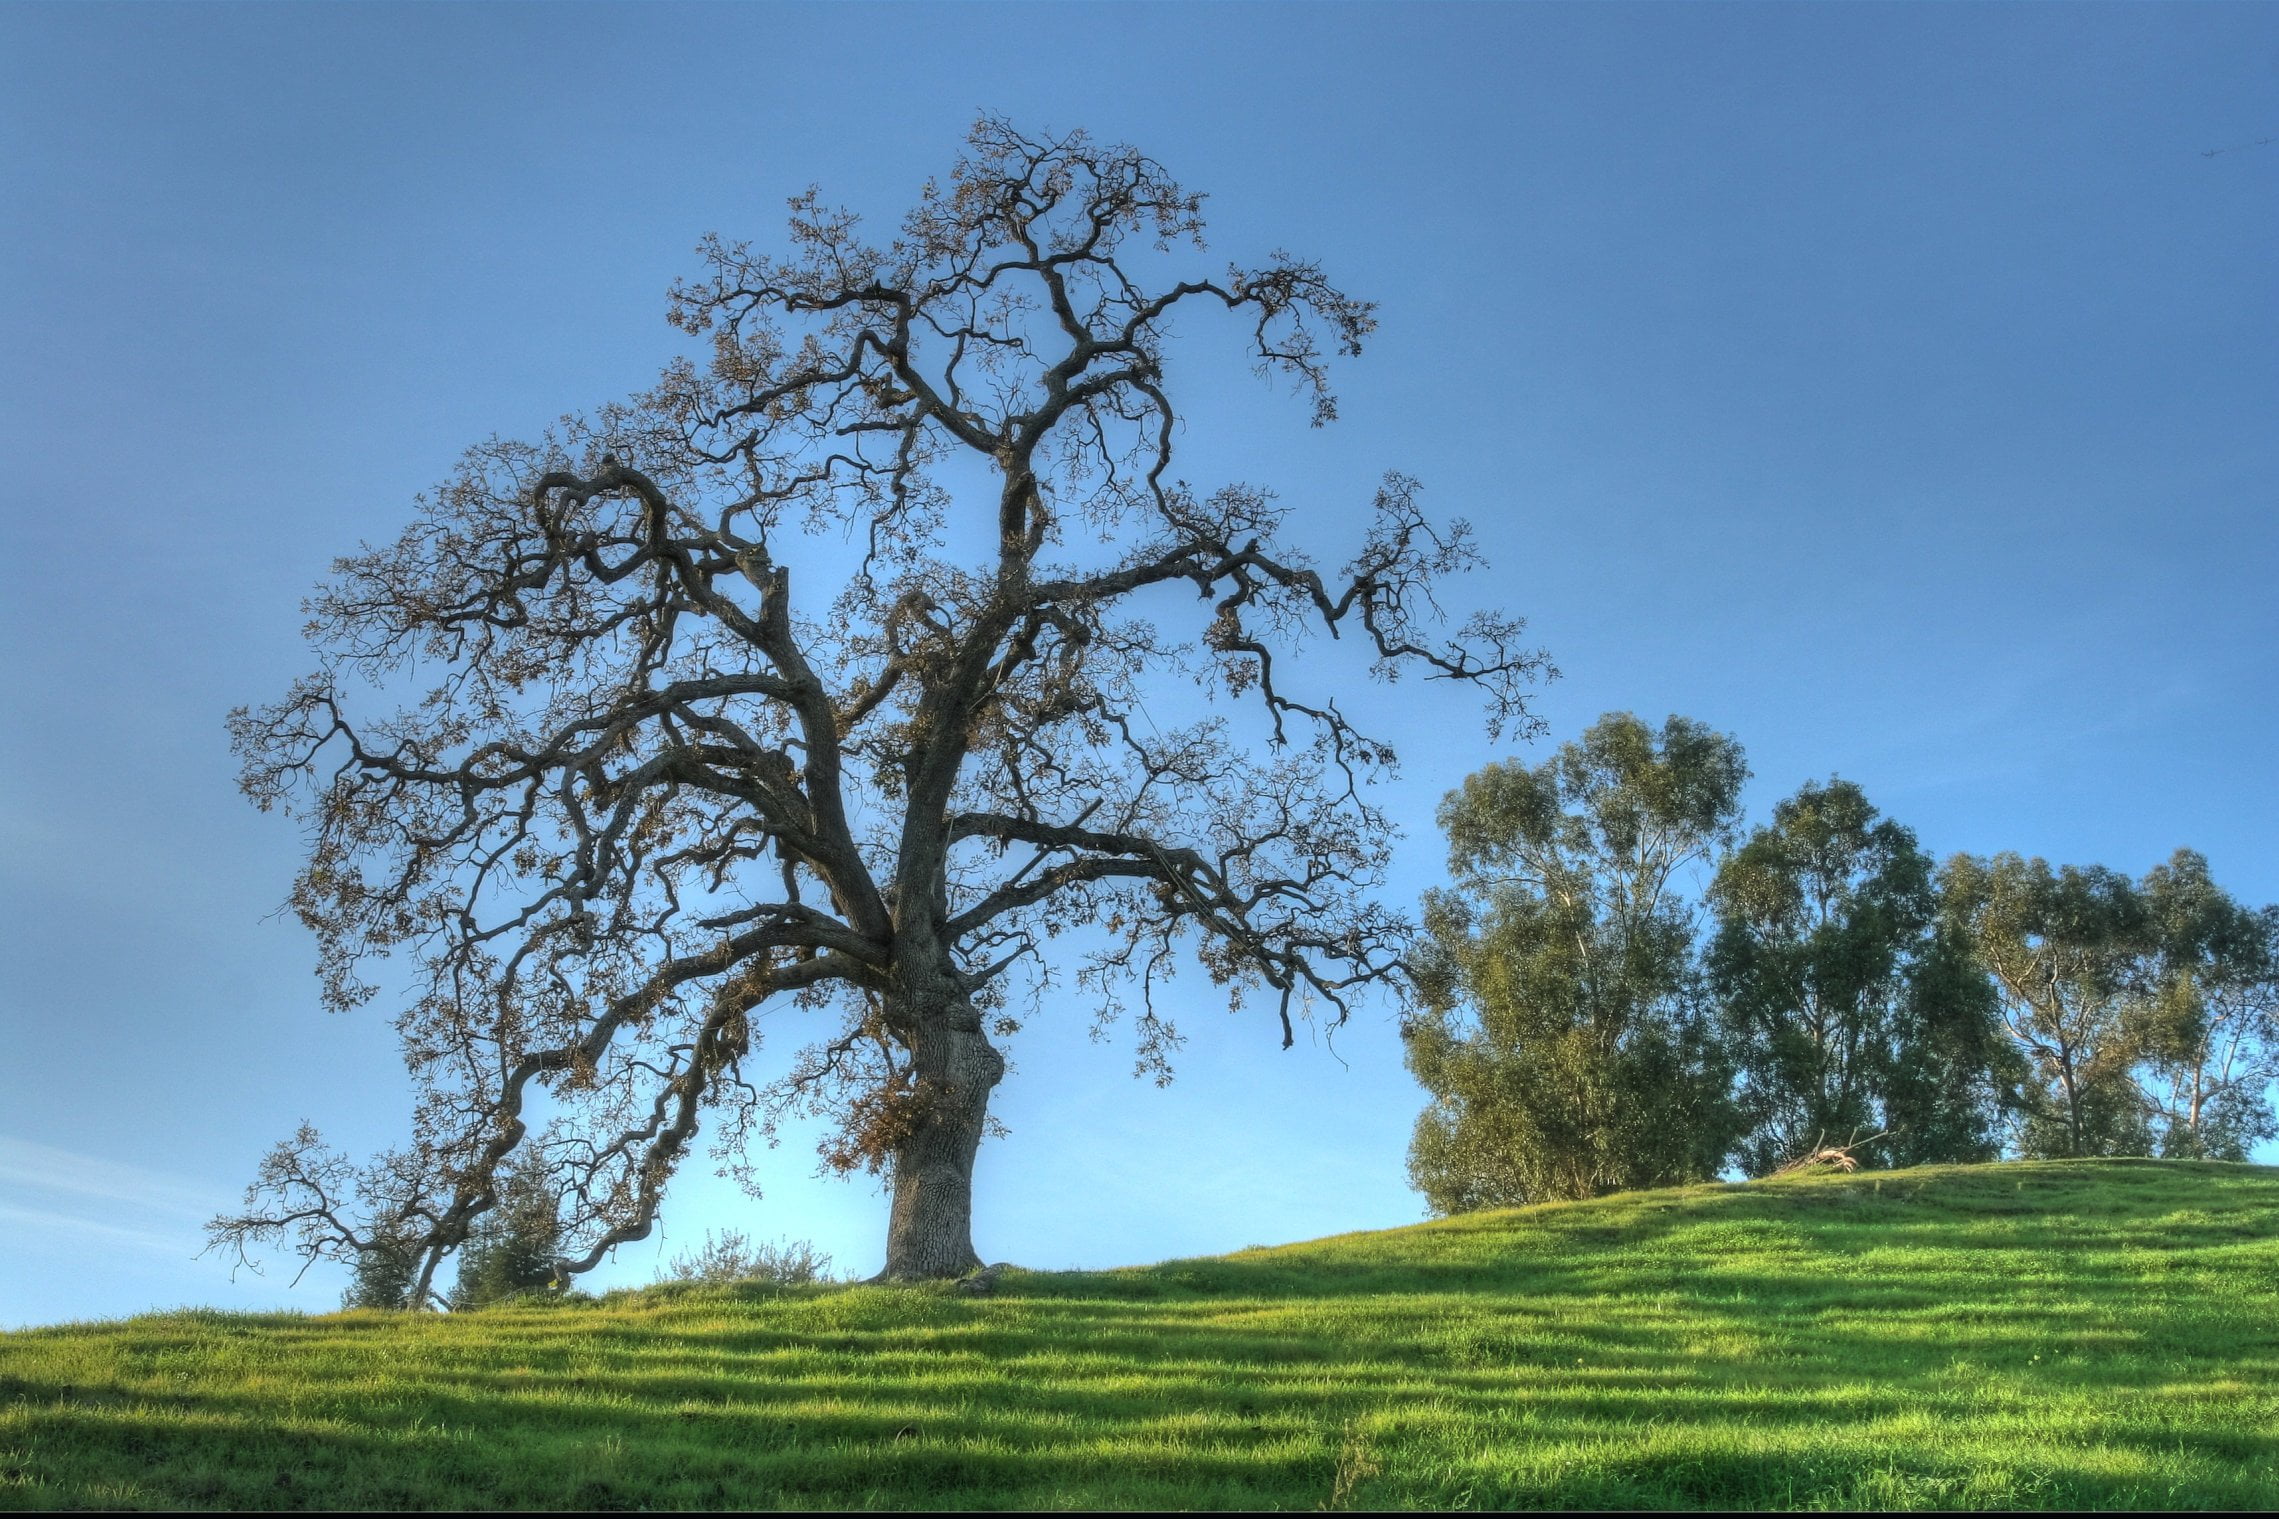 trees on hill under clear blue sky during daytime, oak trees, oak trees